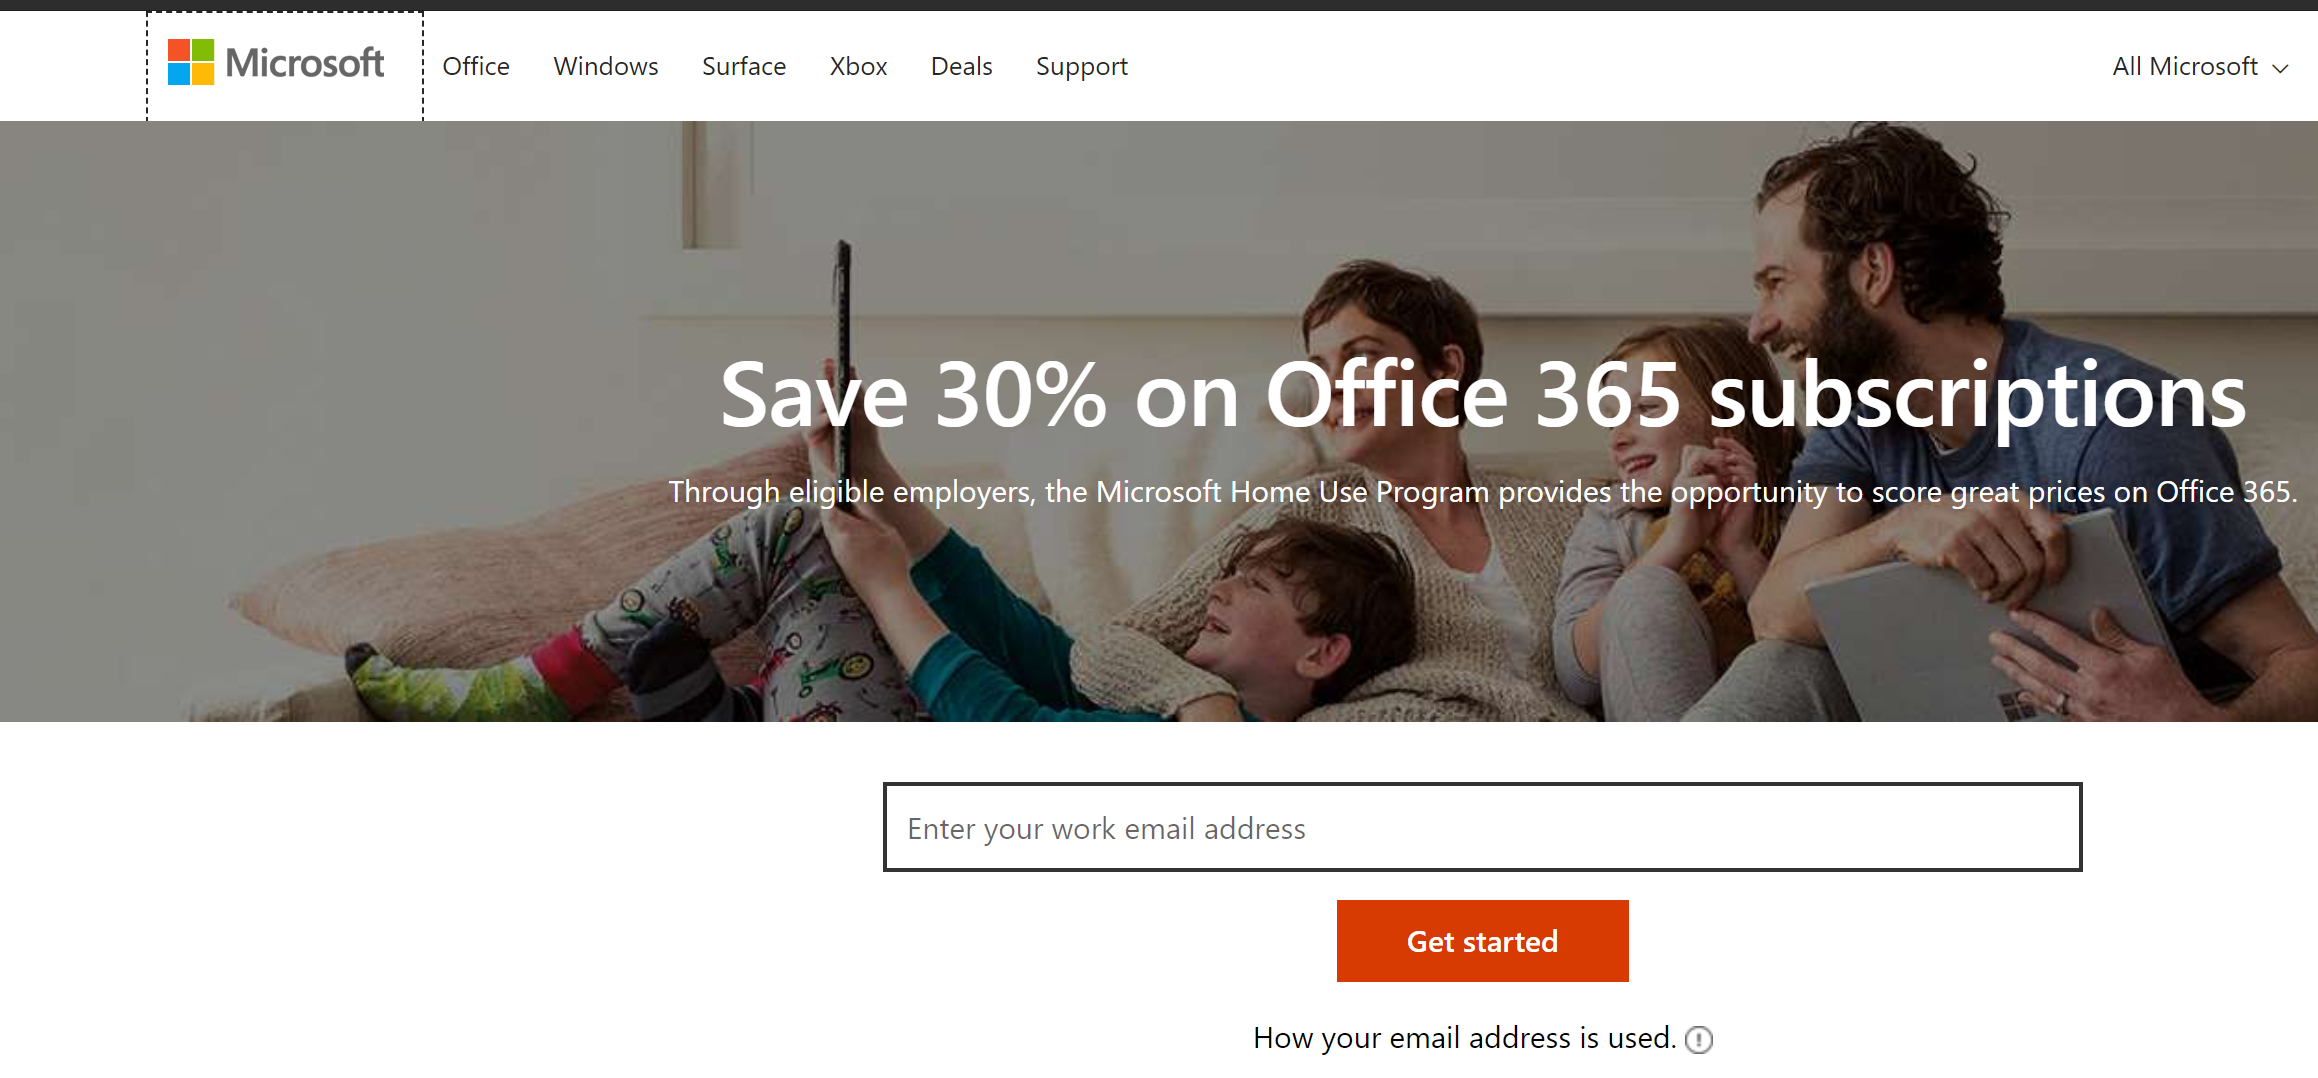 Family on couch using Office 365 prodcuts, 30% off normal subscription price